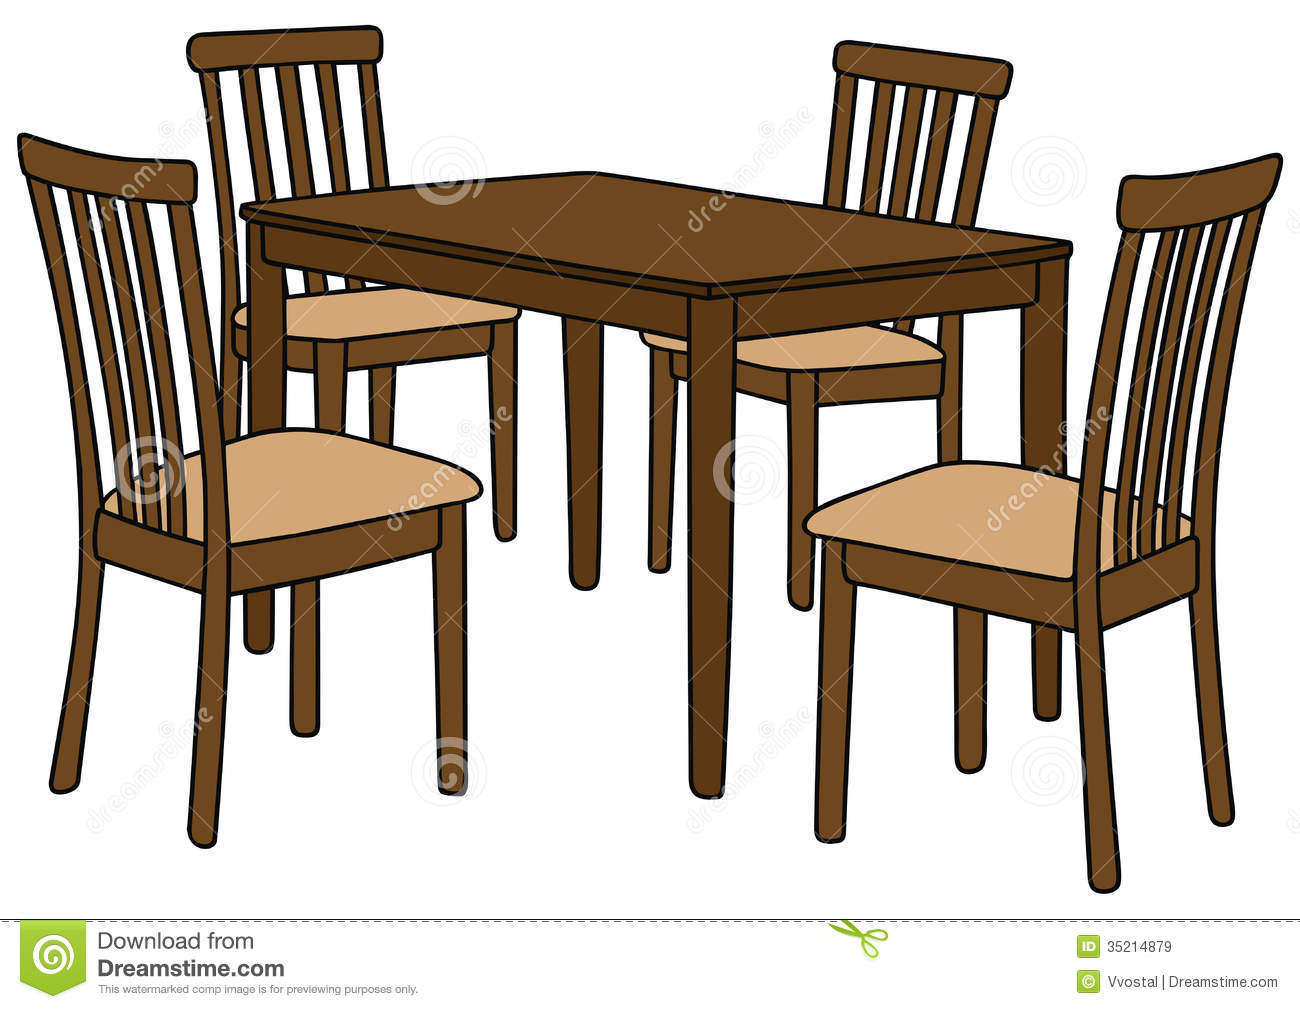 Table Clip Art Round Table Clipart Kitchen Table And Chairs Clipart